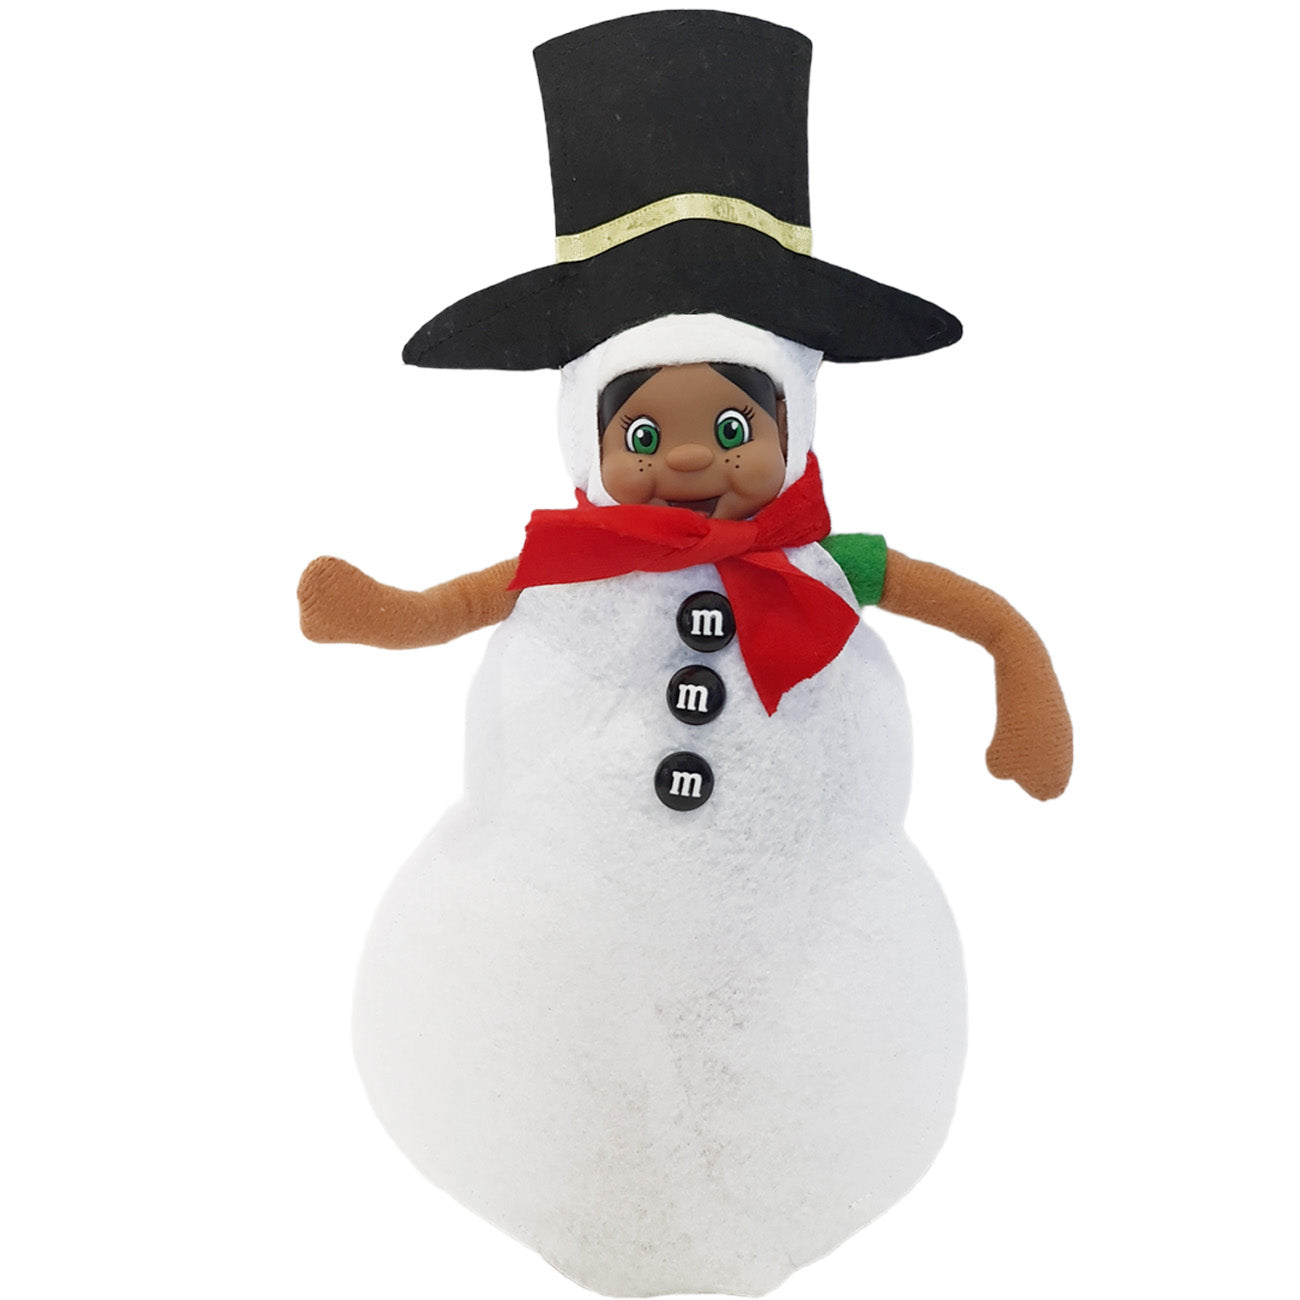 Elf wearing a snowman costume, black hat and red scarf